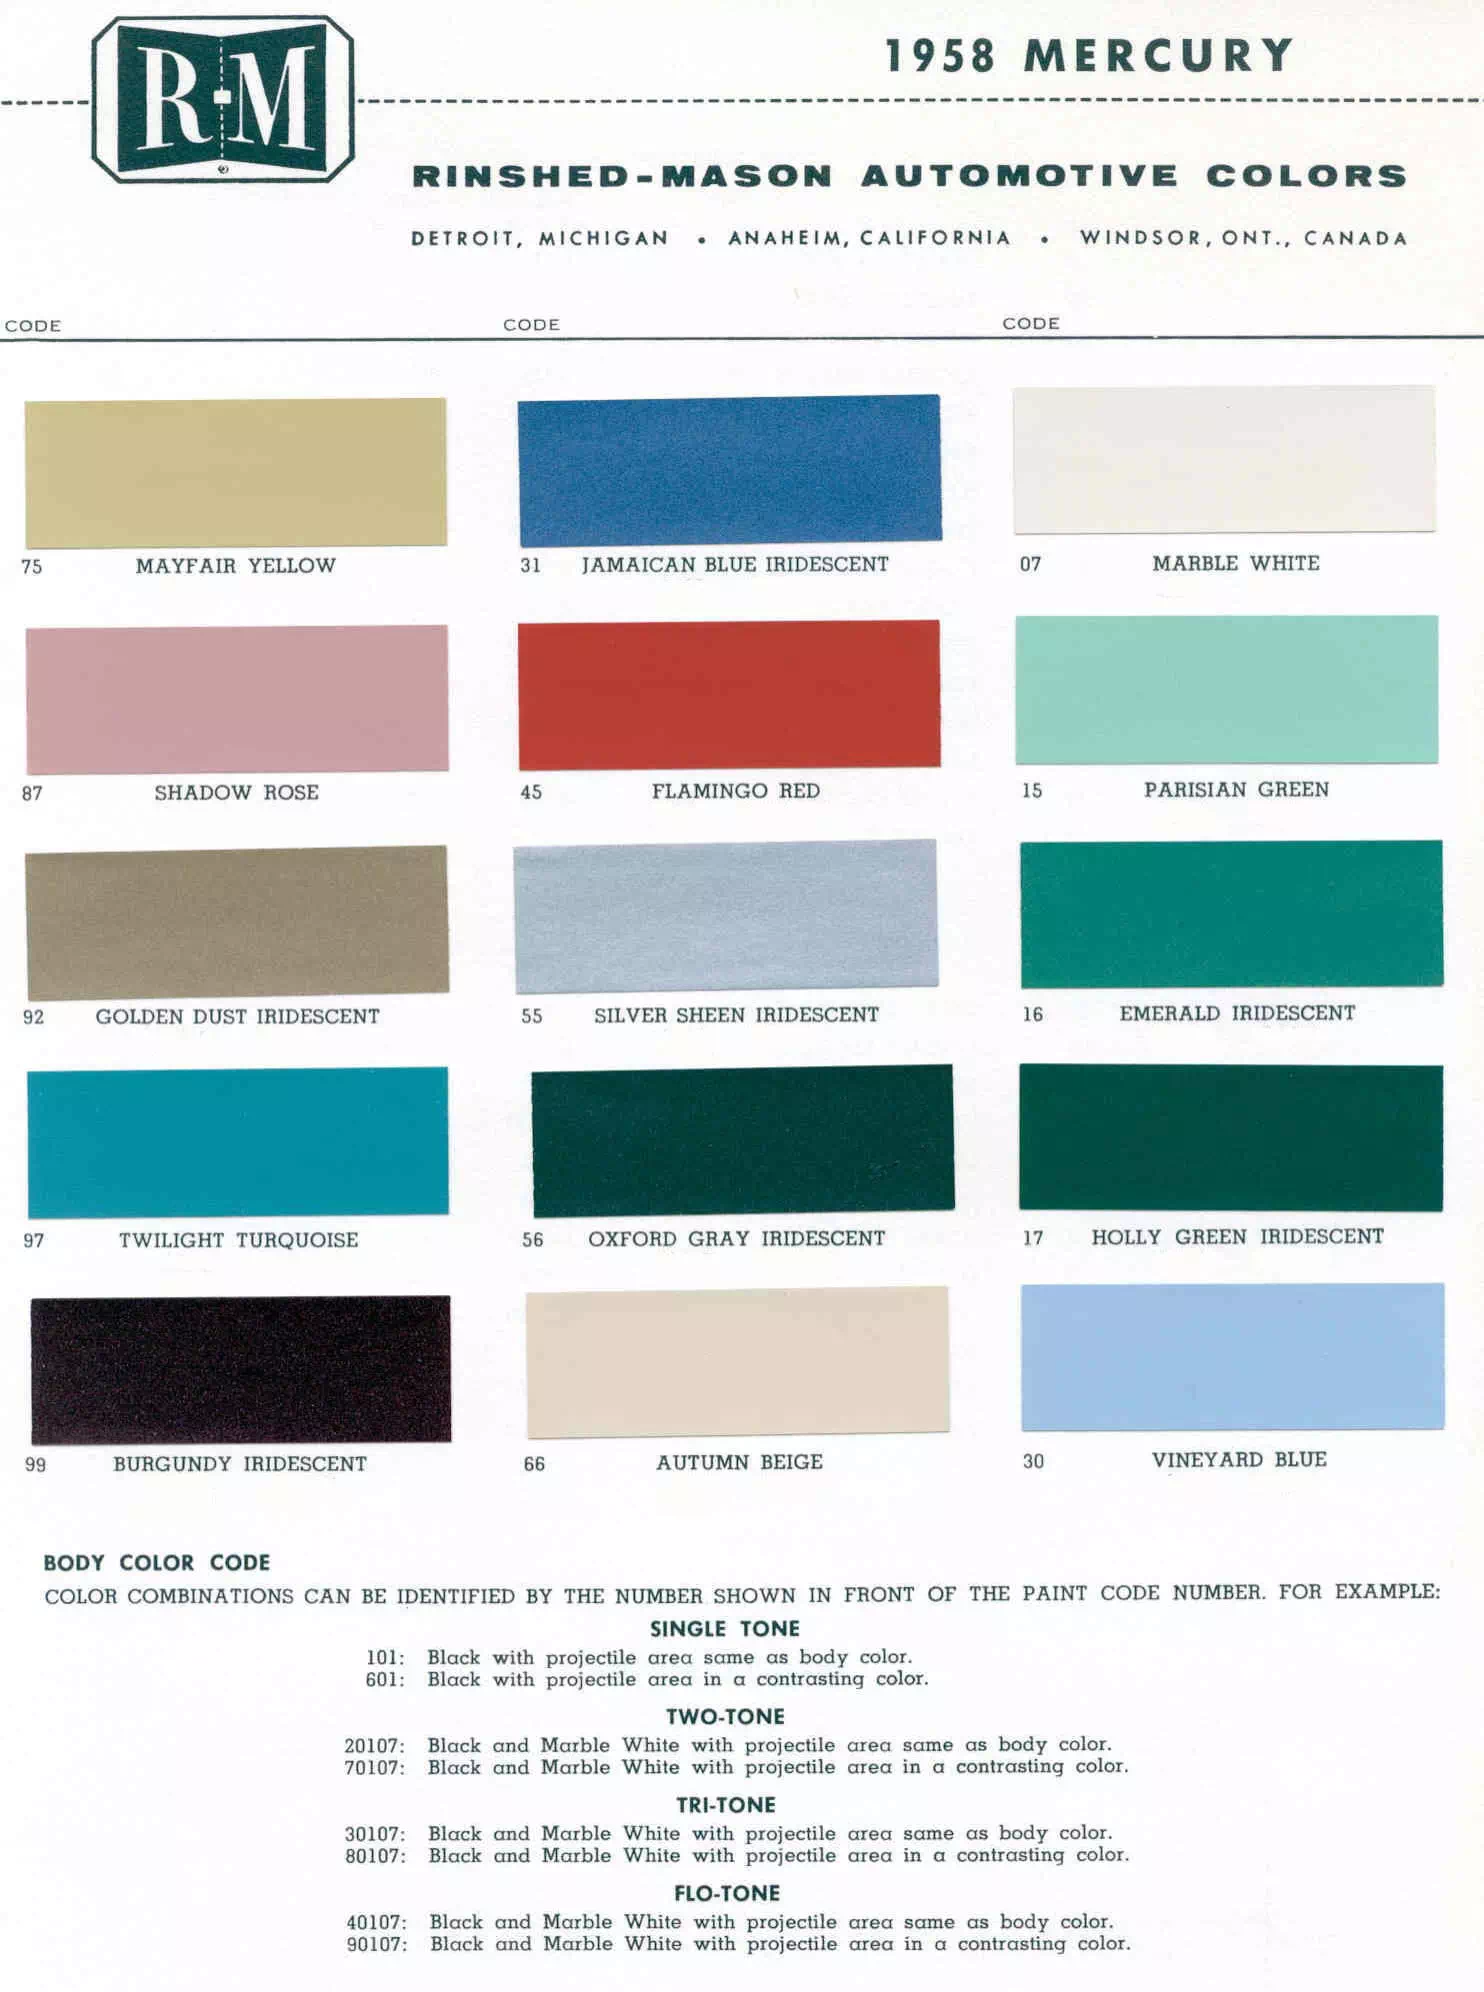 exterior colors, their codes, and example swatches used on the exterior of the vehicles in 1958